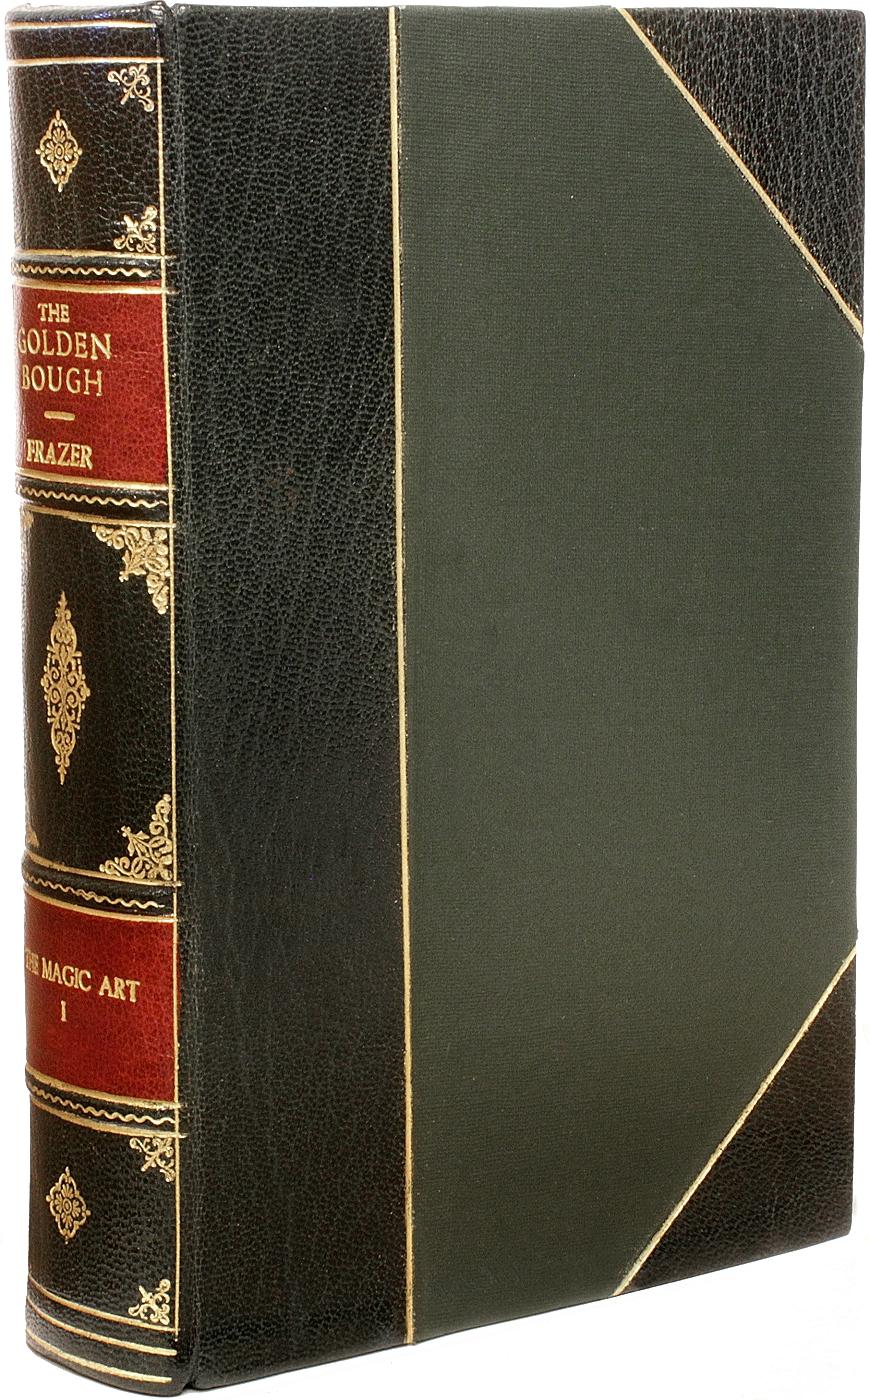 AUTHOR: FRAZER, James George. 

TITLE: The Golden Bough: A Study in Magic and Religion.

PUBLISHER: London: Macmillan & Co., Ltd., 1911-15.

DESCRIPTION: THIRD EDITION REVISED AND ENLARGED. 13 vols., complete, 8-7/8